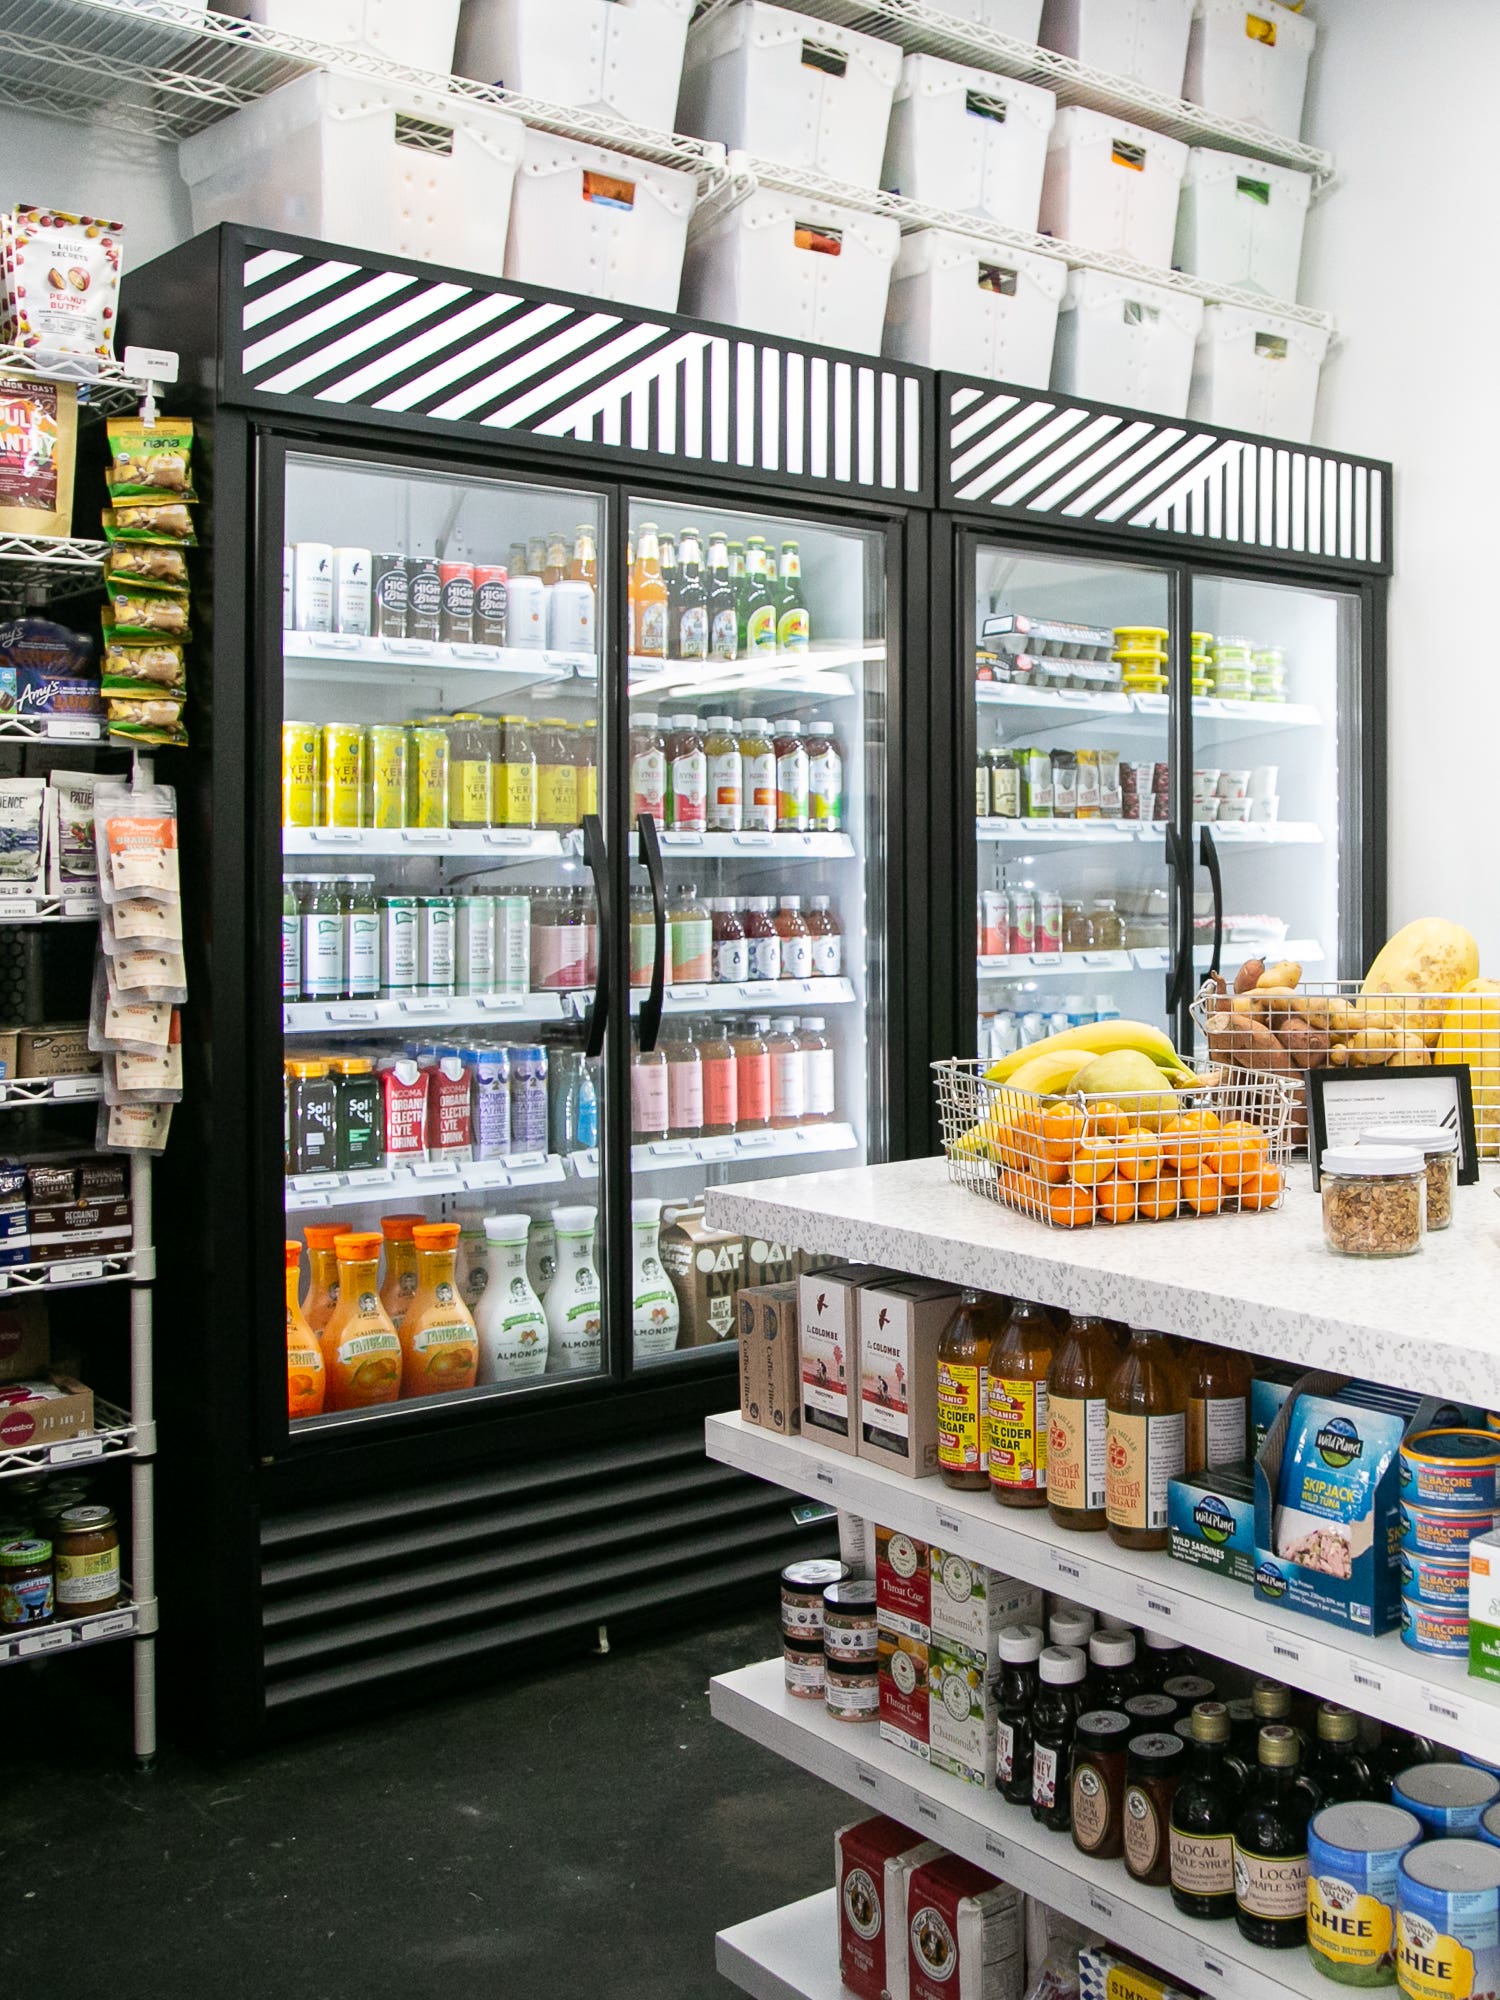 7-Eleven, Begone: A Healthy, Clean Version Has Arrived